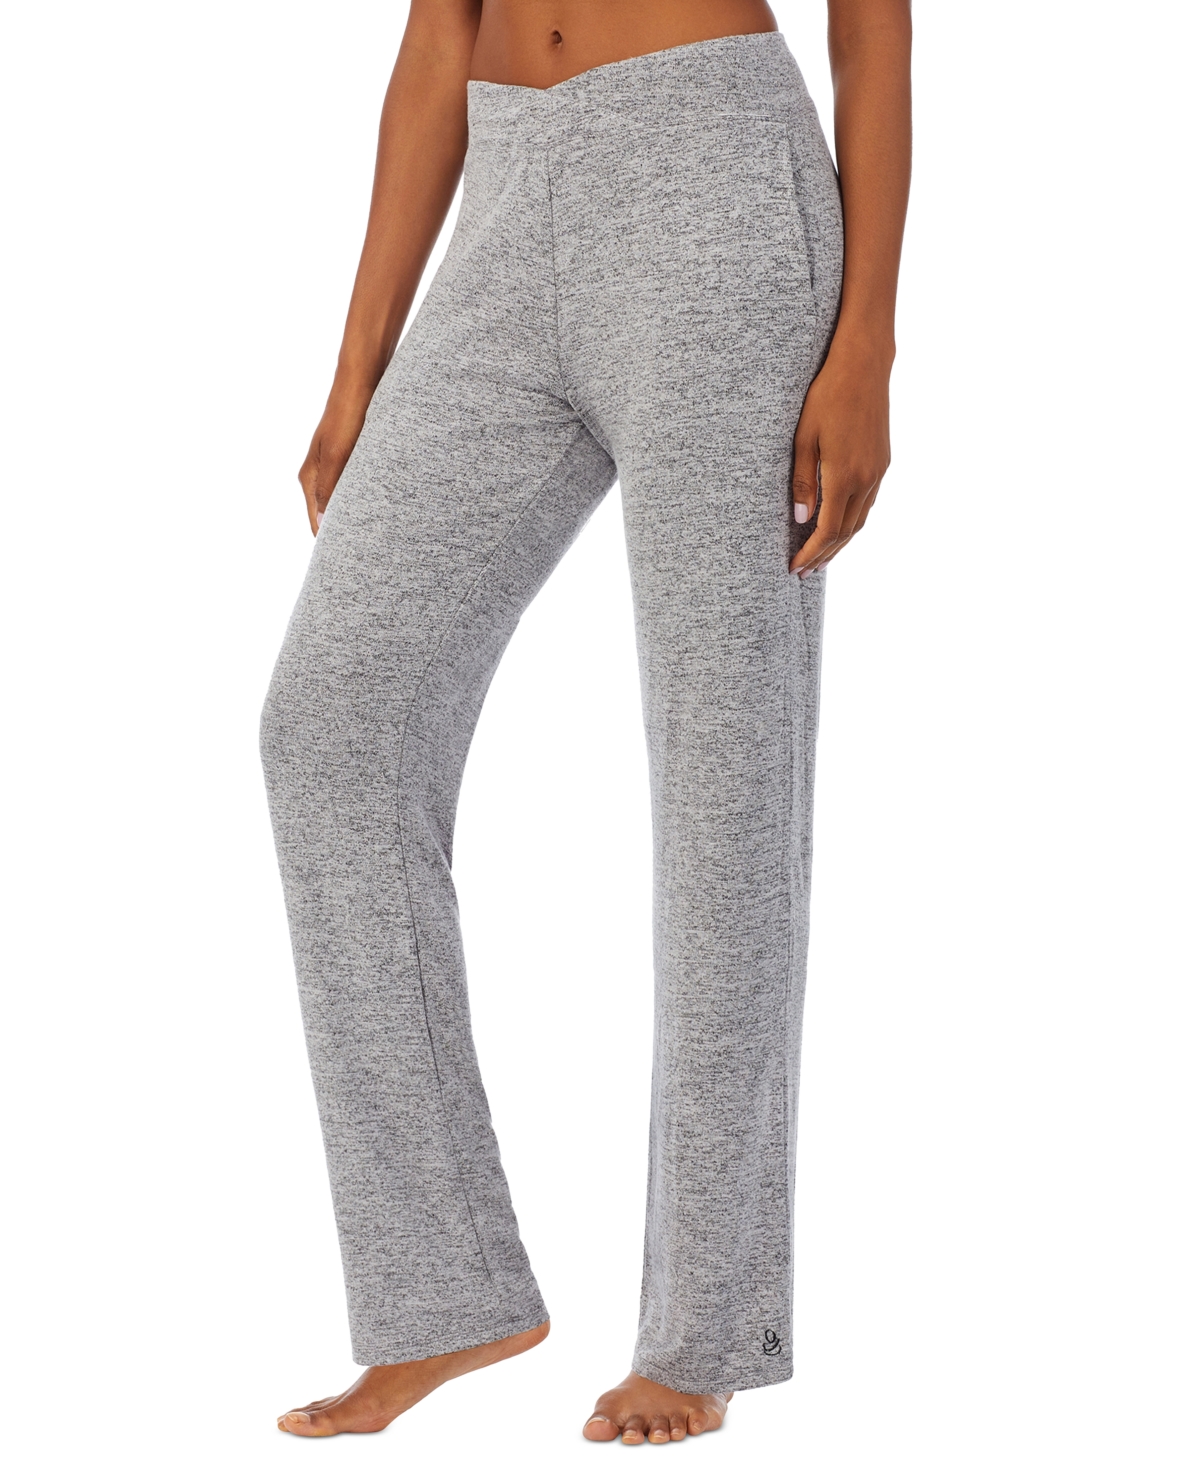 Cuddl Duds Women's Soft Knit Mid-Rise Lounge Pants - Marled Grey